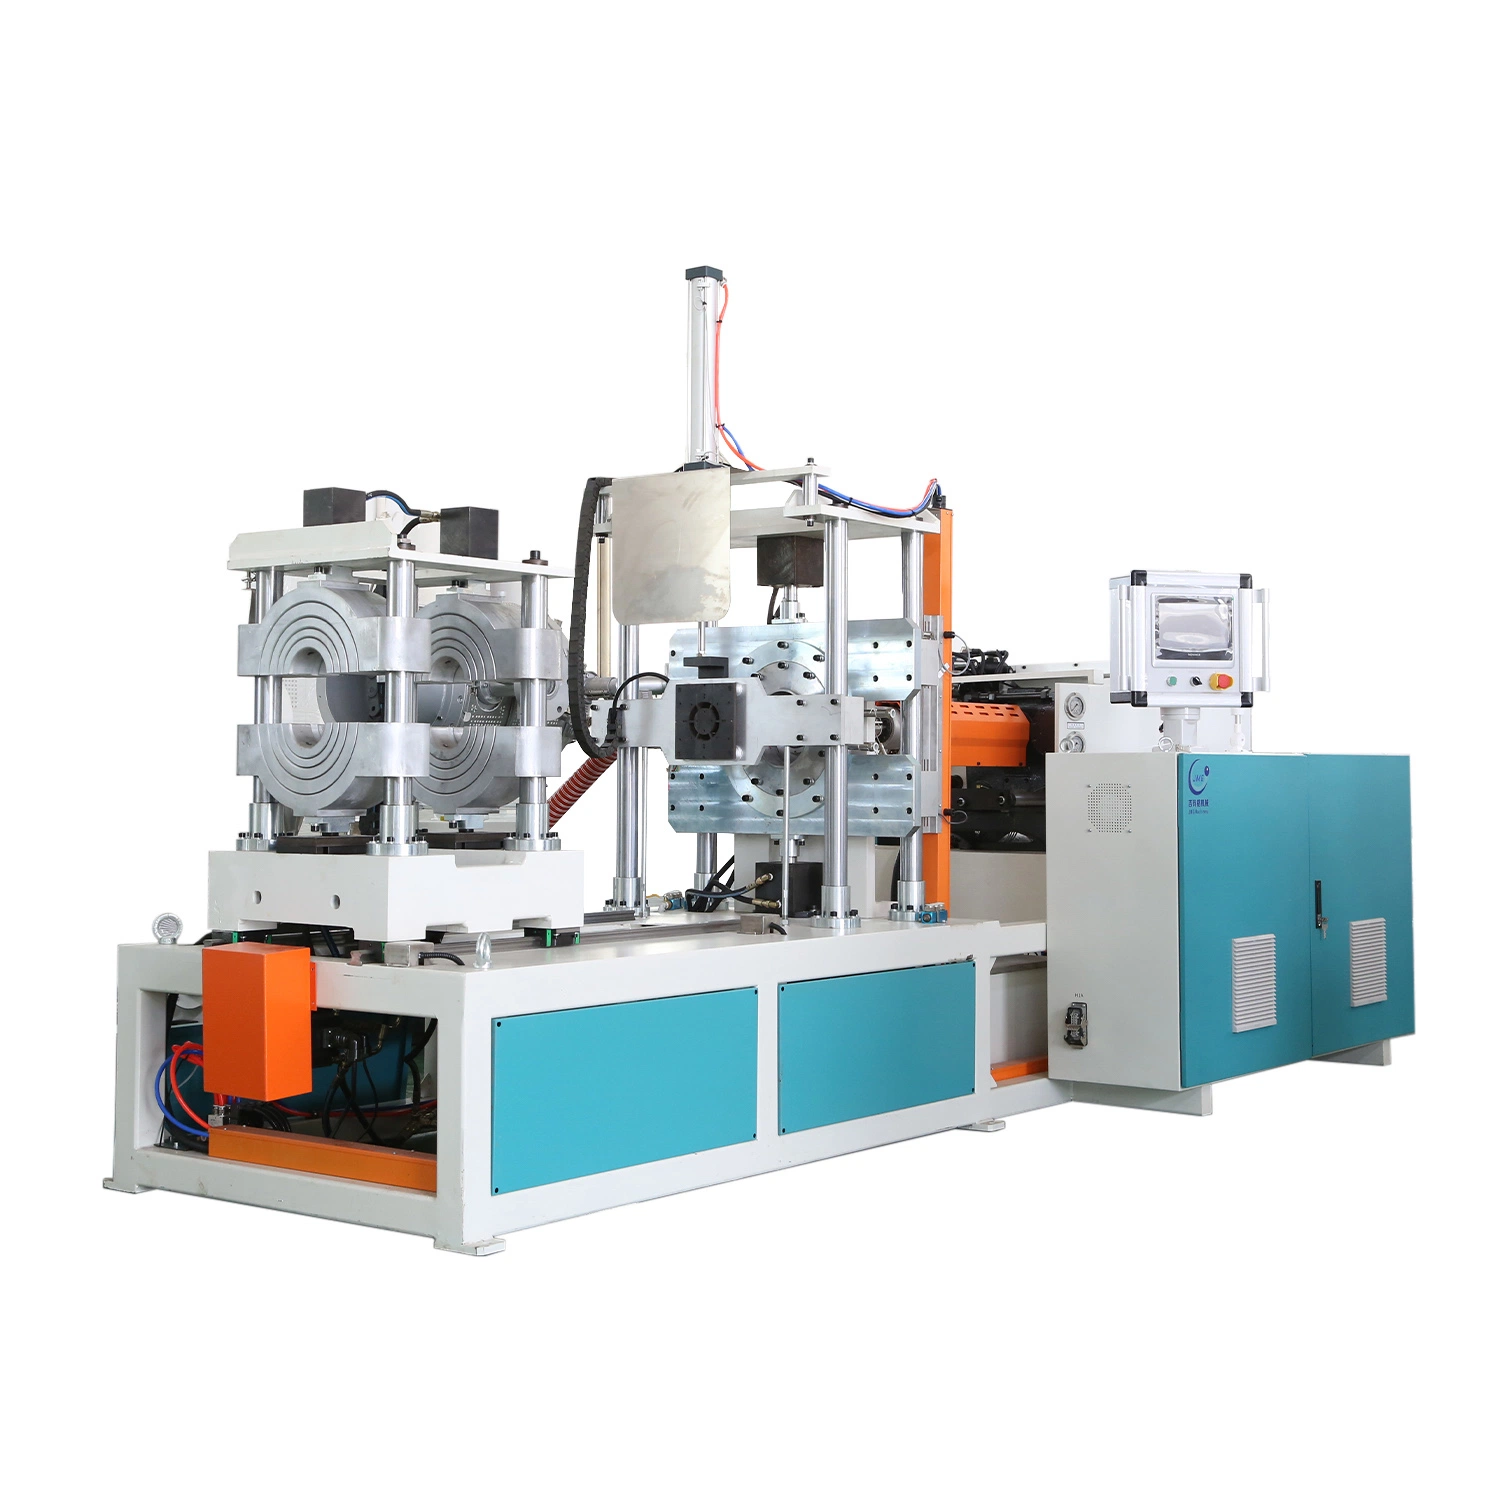 Plastic PVC/CPVC/UPVC Rtp Oil Pipe/Tube (extruder, haul off, cutting winding, belling) Extrusion/Extruding Making Production Line Machine